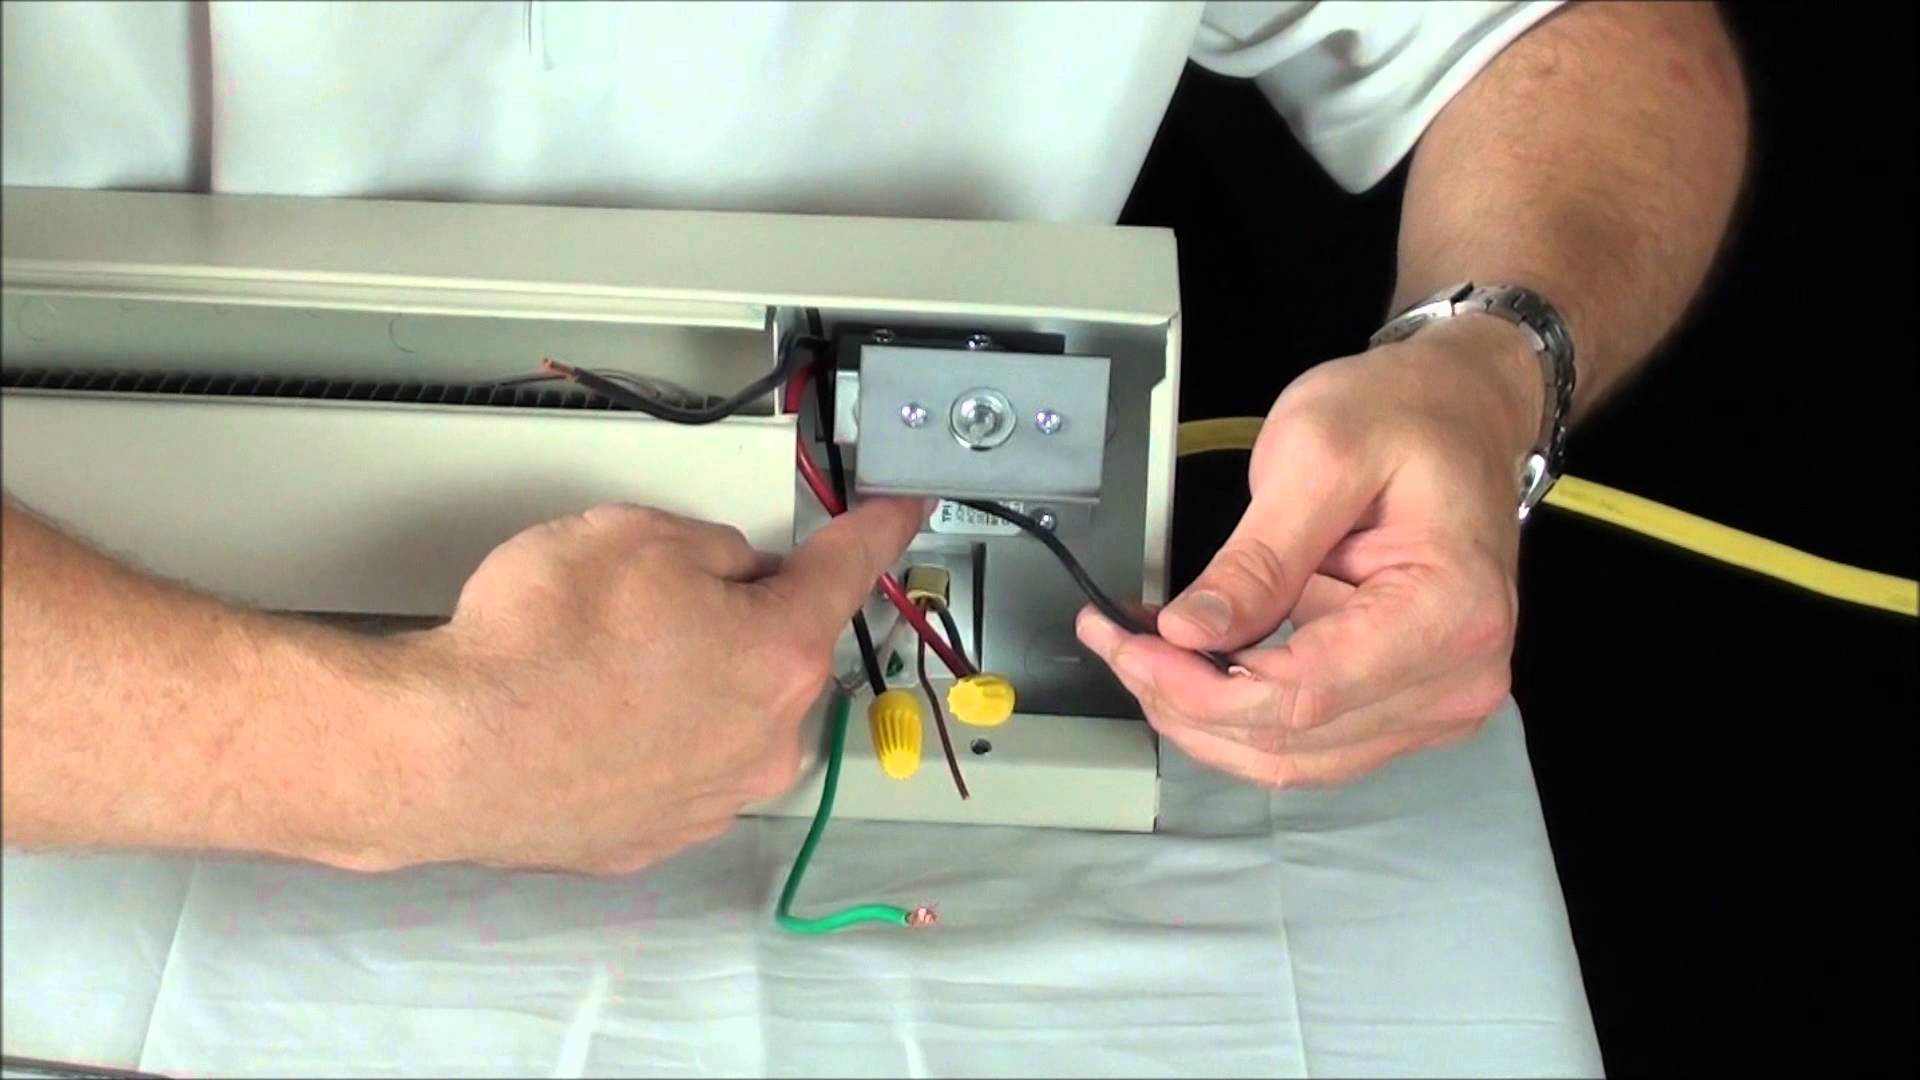 How to Install a Baseboard Heater Thermostat - Boca Raton Chimney Repair